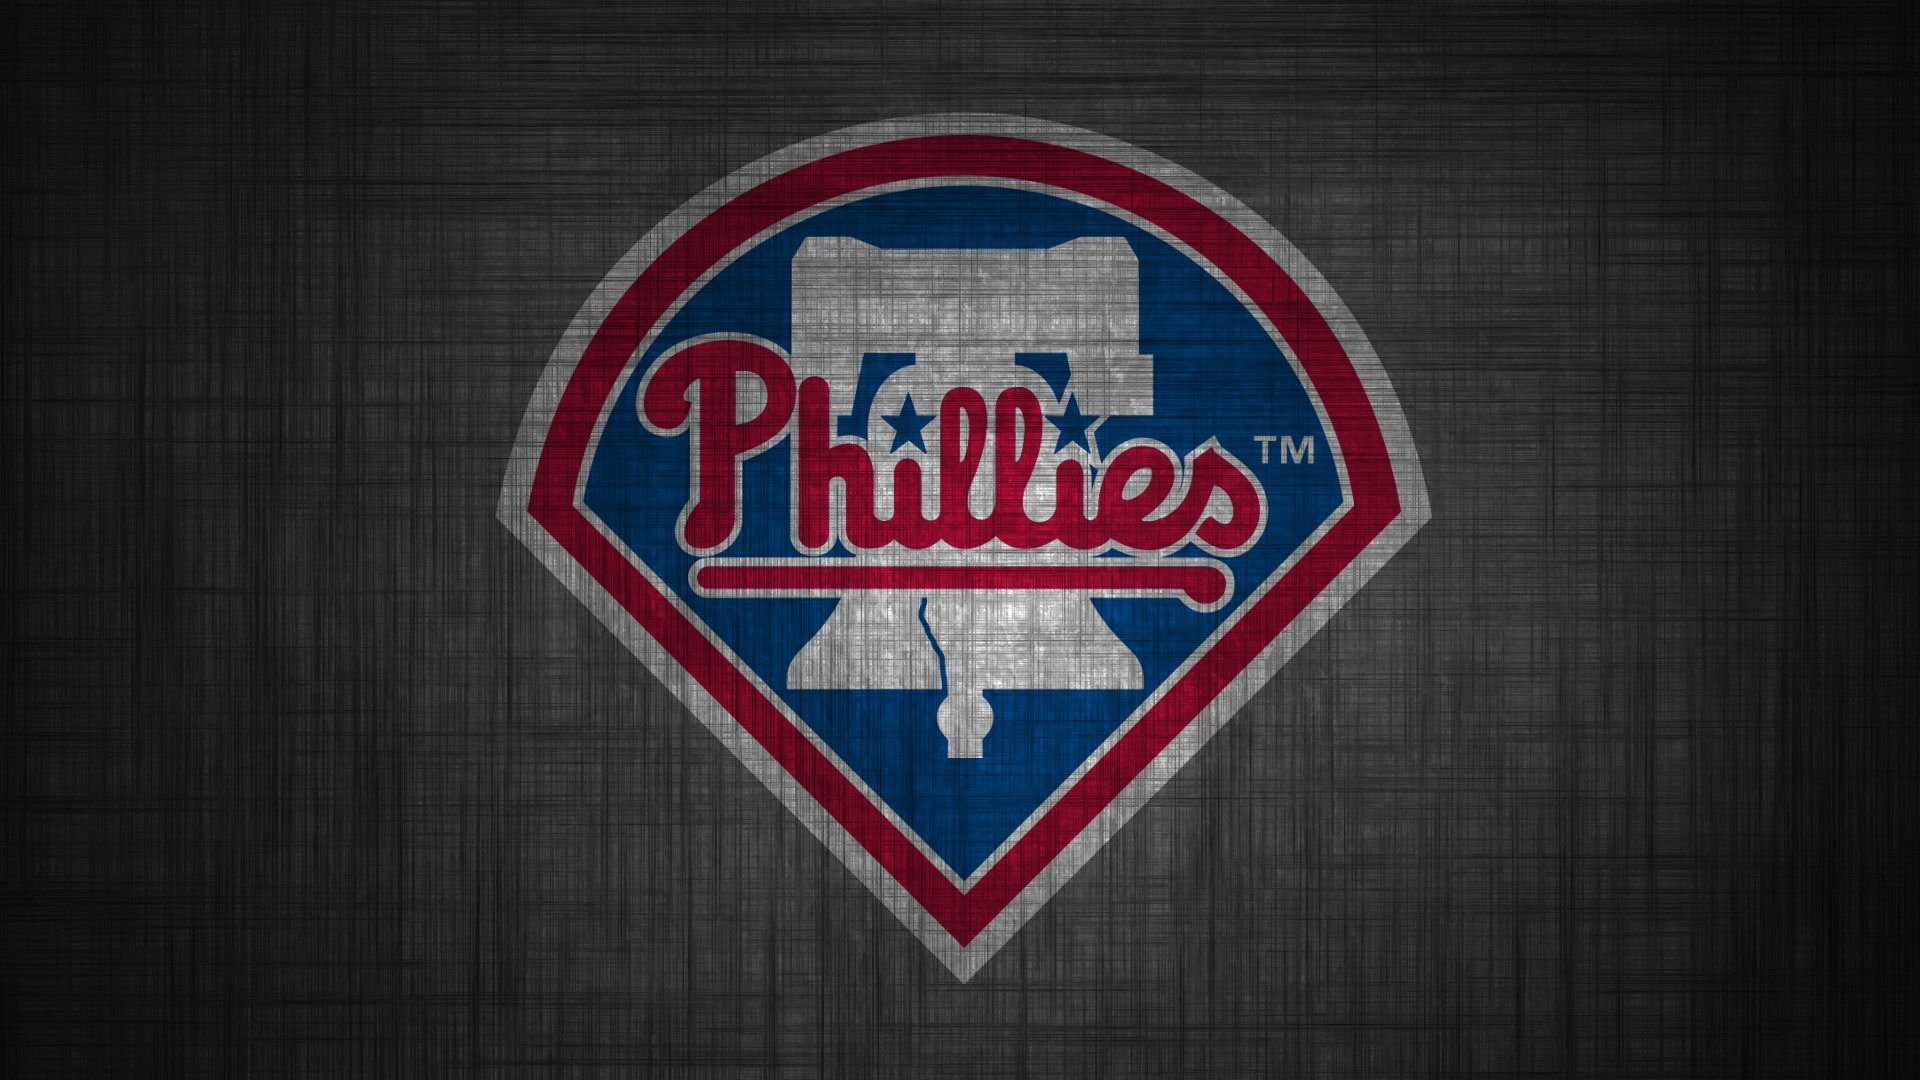 1920x1080 Phillies Desktop Background Related Keywords & Suggestions .